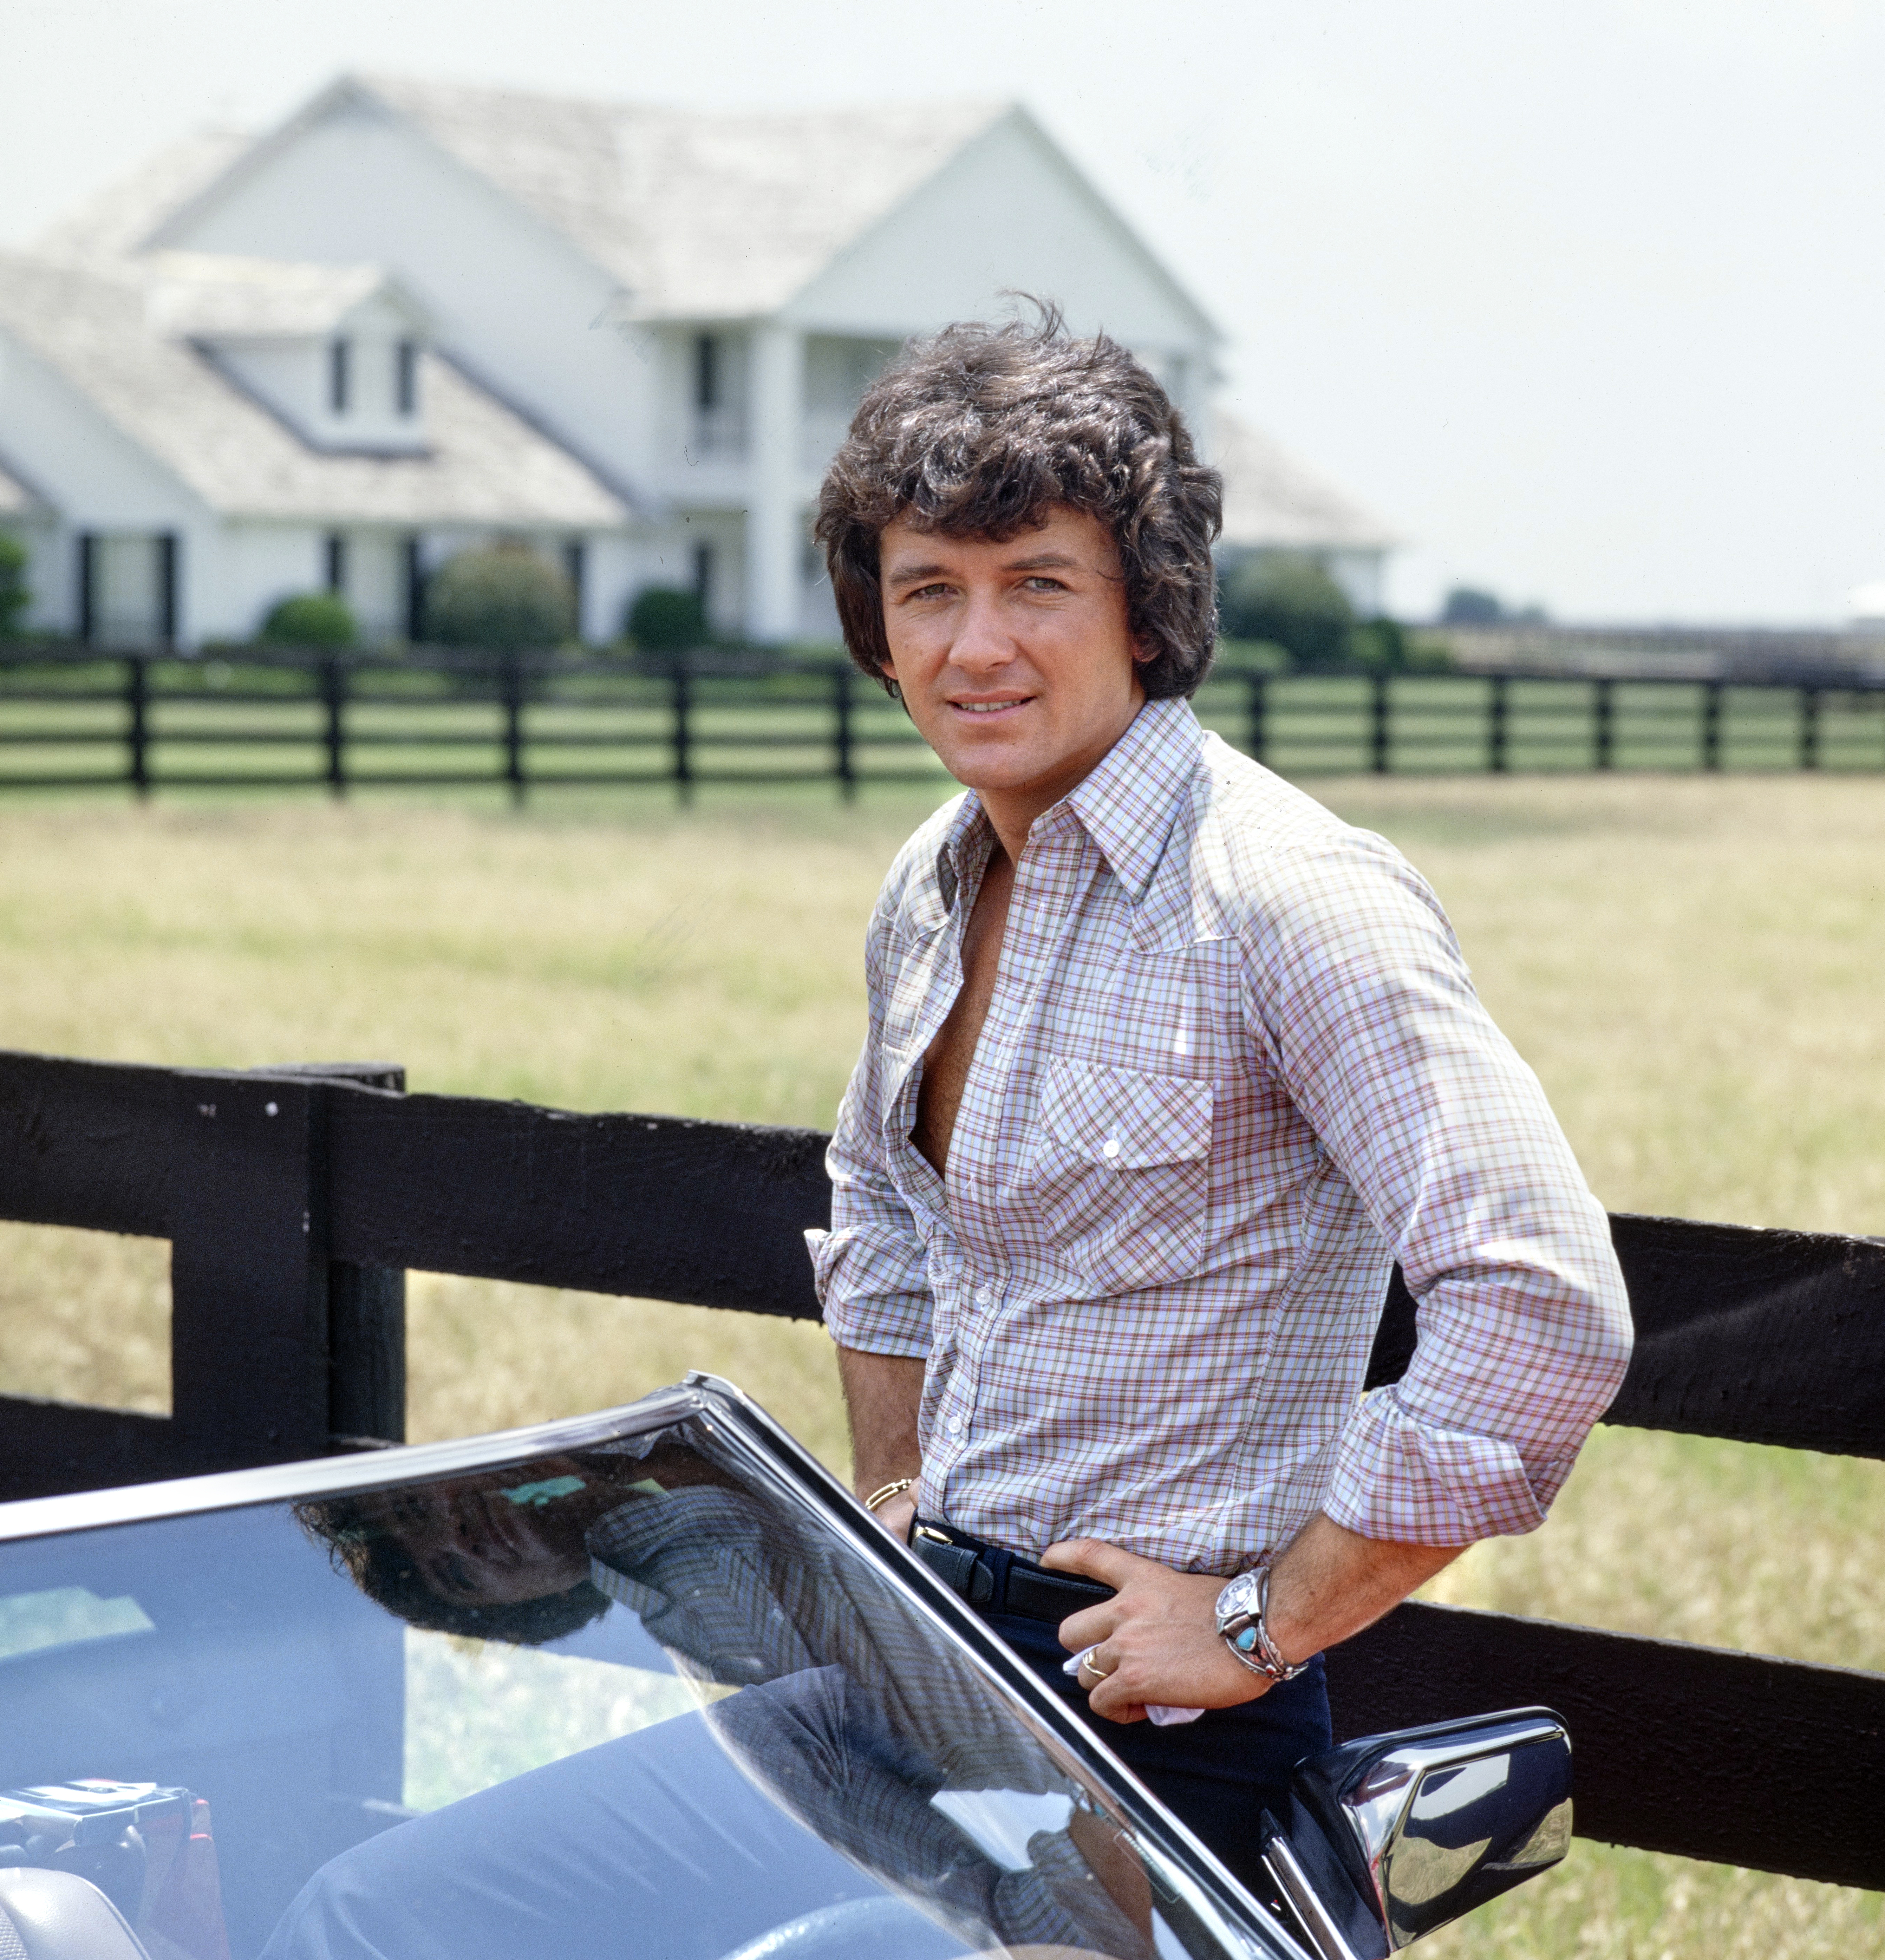 Patrick Duffy as Bobby Ewing in the premiere episode of "Dallas" in Los Angeles, 1978 | Source: Getty Images